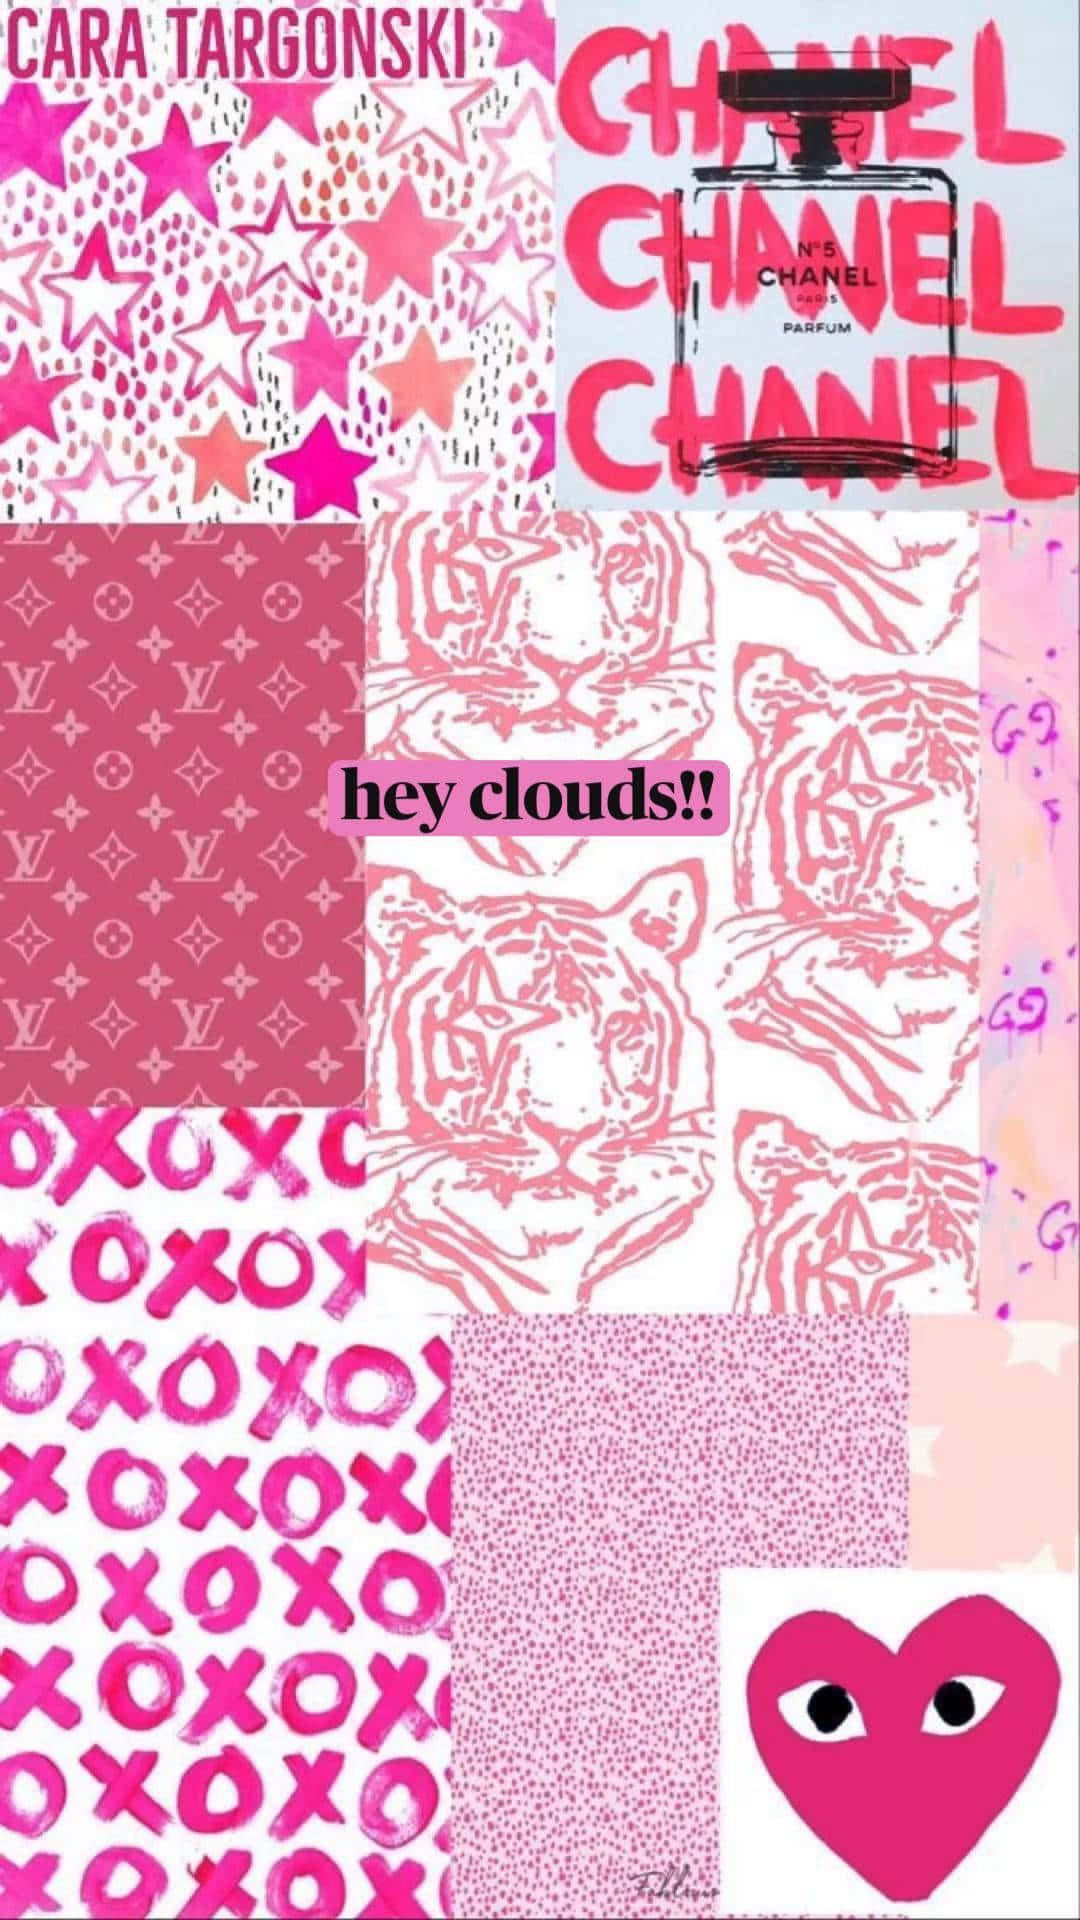 a collage of pink and white patterns with hearts and teddy bears